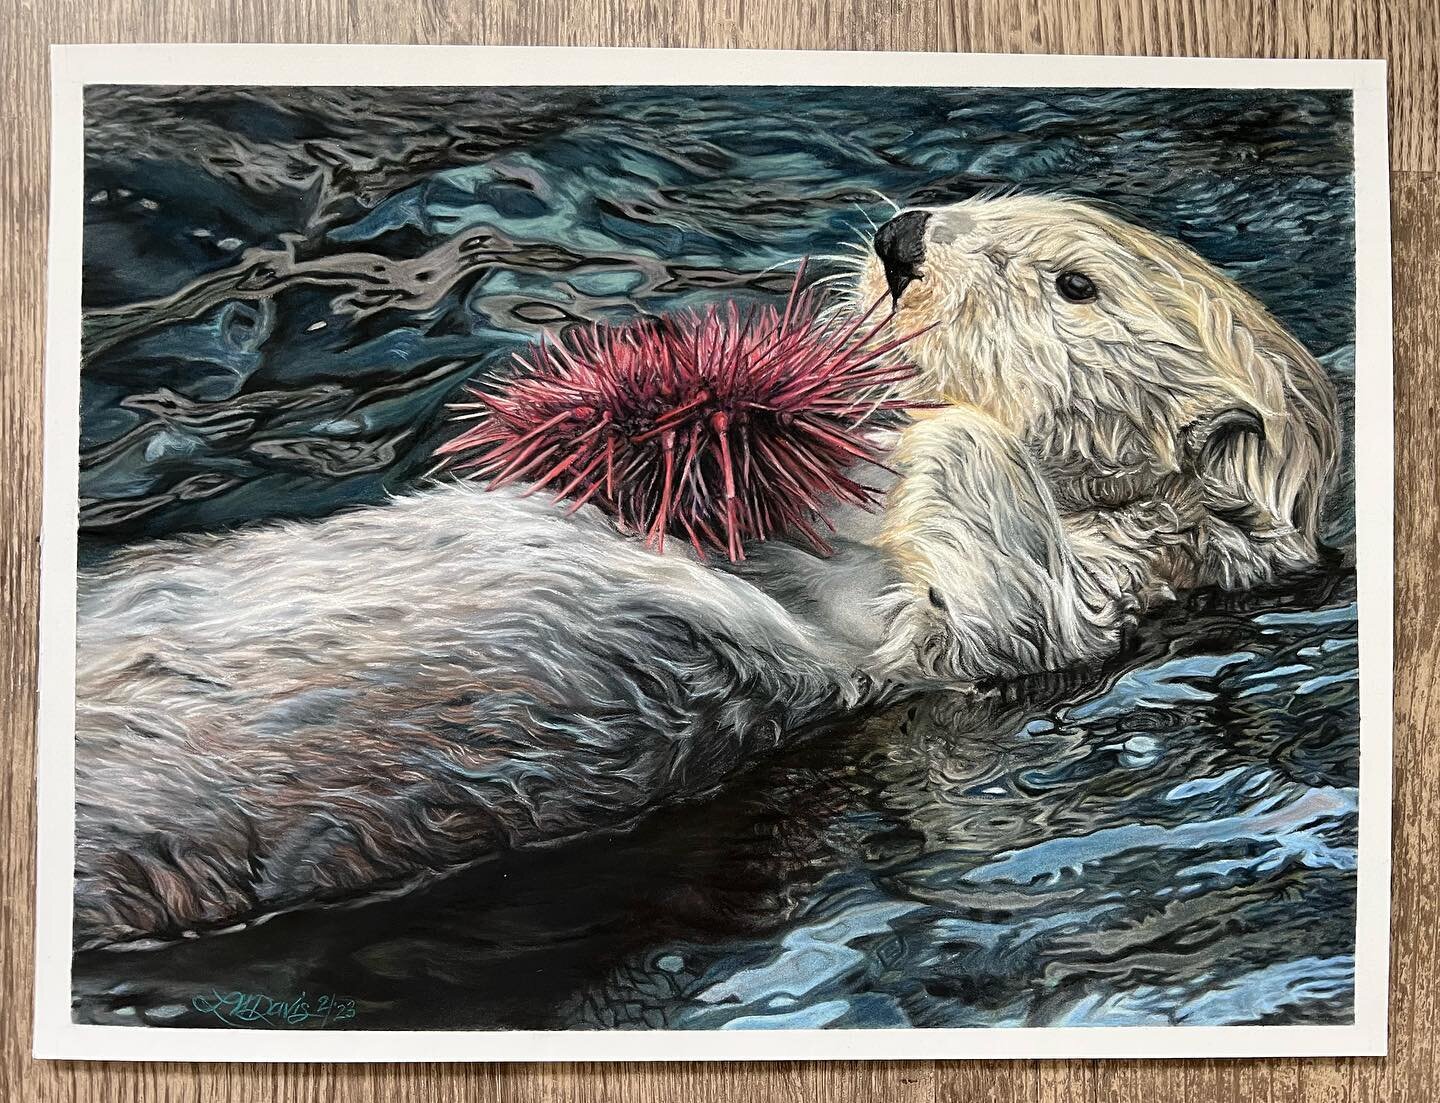 Oh hey there 👋 Happy 2023! It was a bit of a slow start but I finally wrapped up my 🦦 ! I will be submitting this buoyant sun bather in my application for @societyofanimalartists in the upcoming months. I can&rsquo;t wait to have him scanned and ha